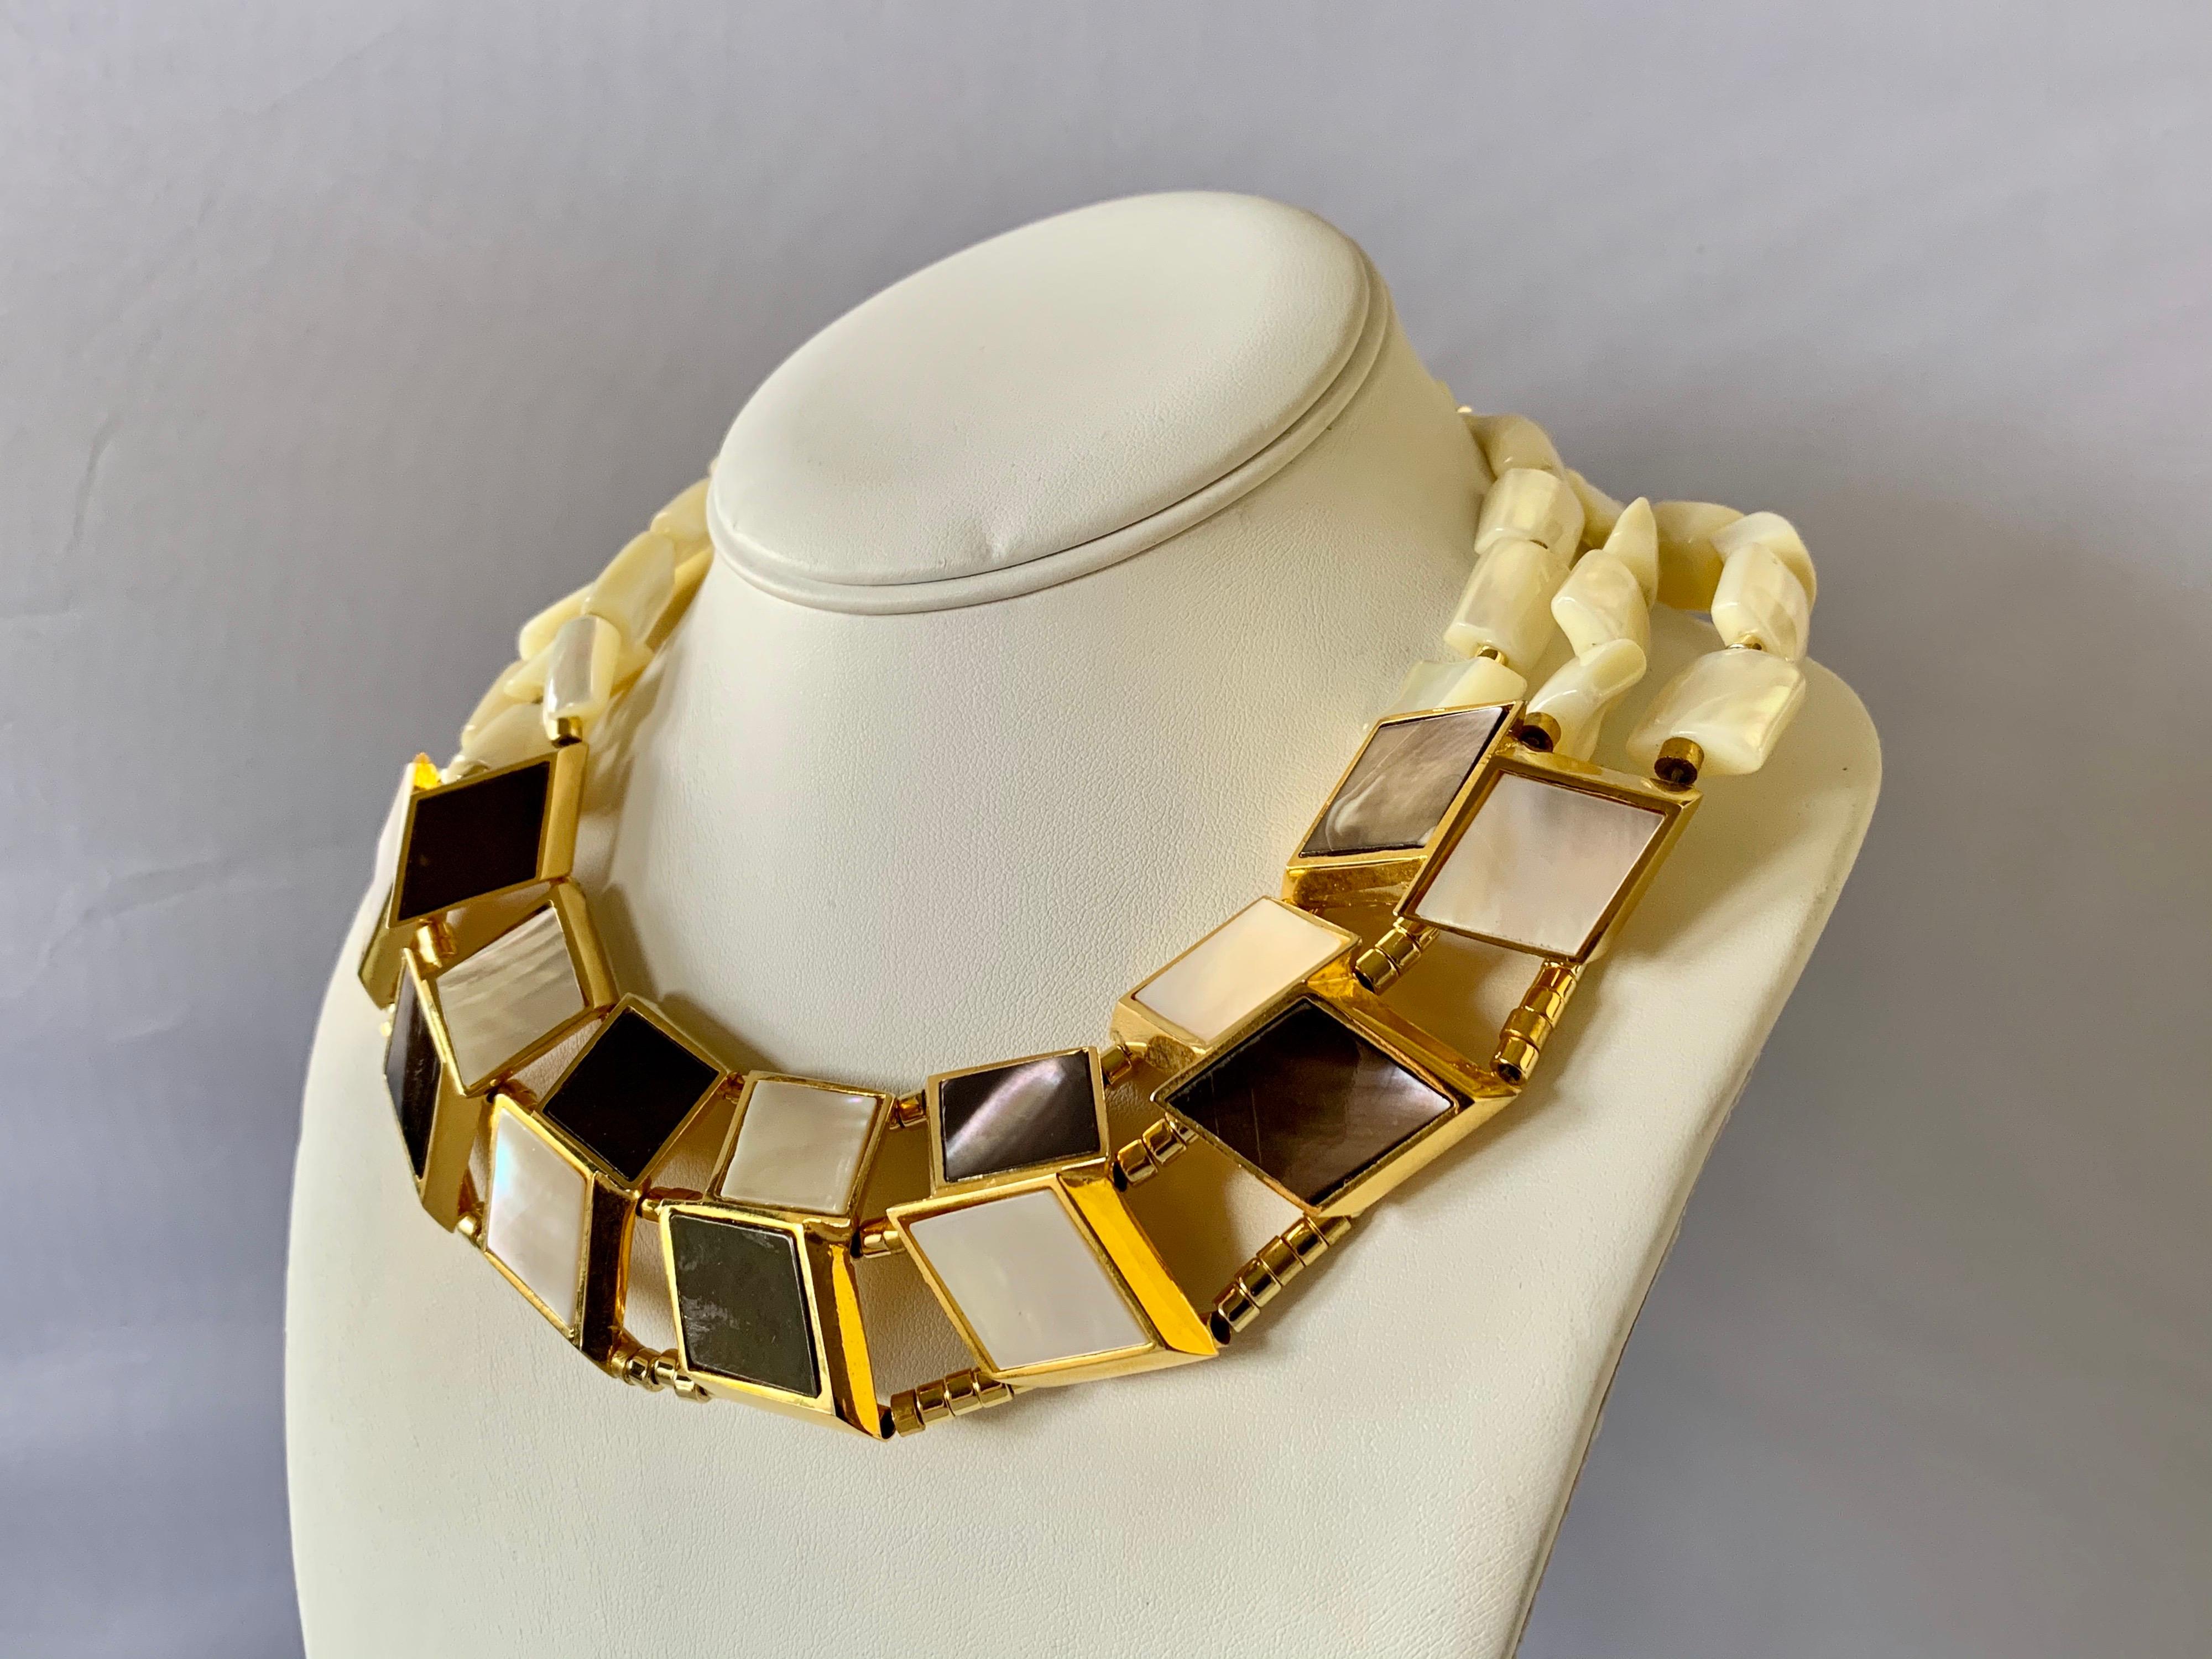 Architectural gilt (electroplated) mother of pearl inlay necklace by William de Lillo for Nina Ricci haute couture circa 1980. Comprised out of gilt metal 